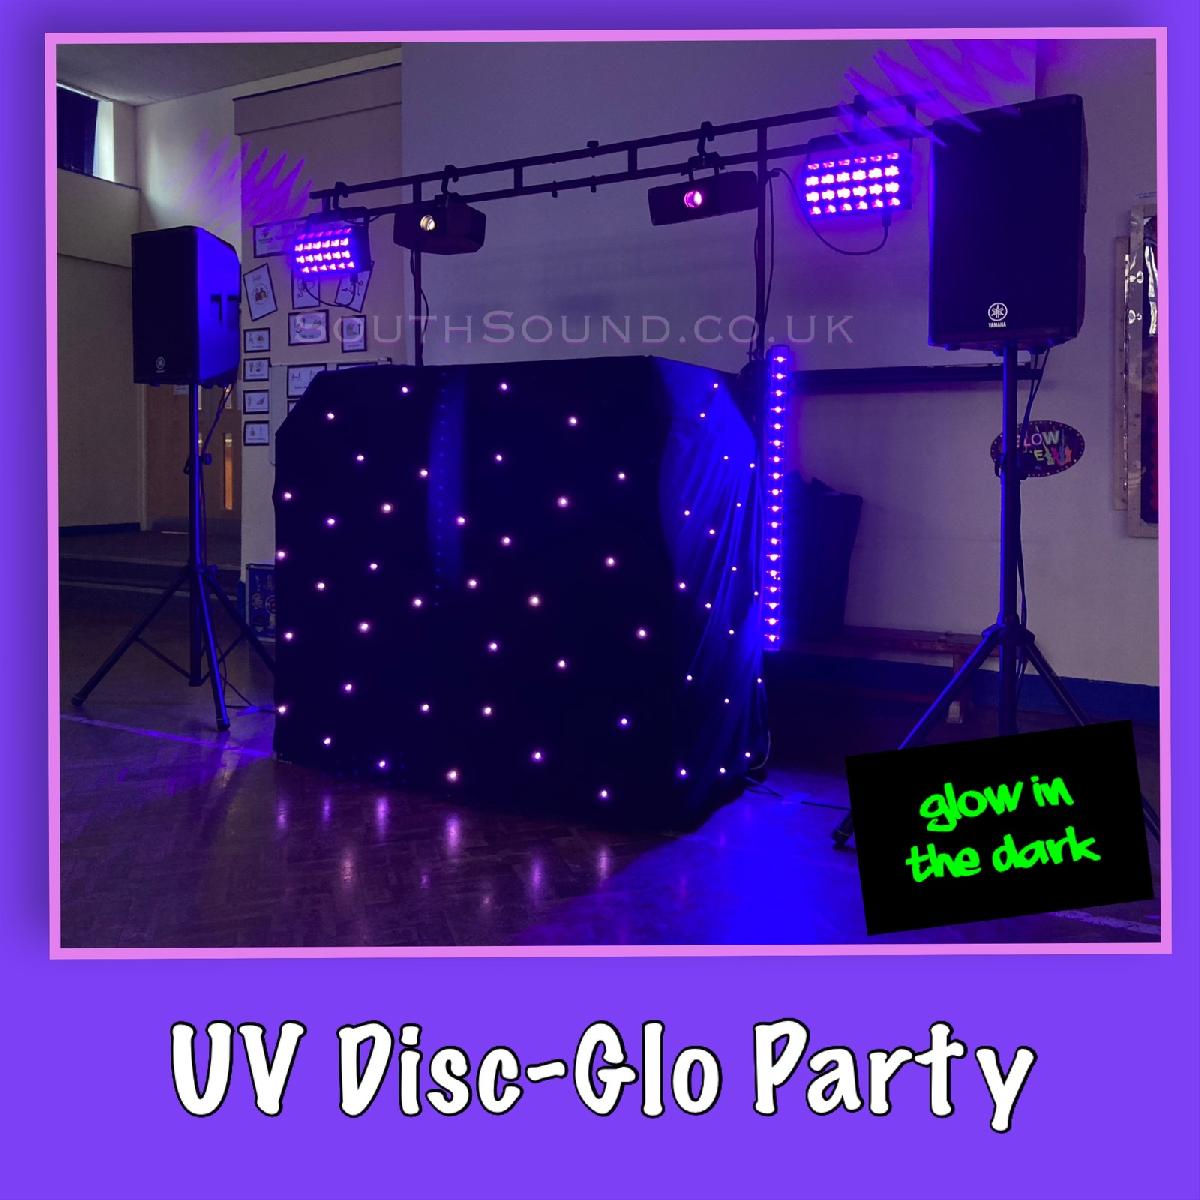 SouthSound Mobile Disco Glow in the dark parties: A vibrant stage with a purple and UV lights